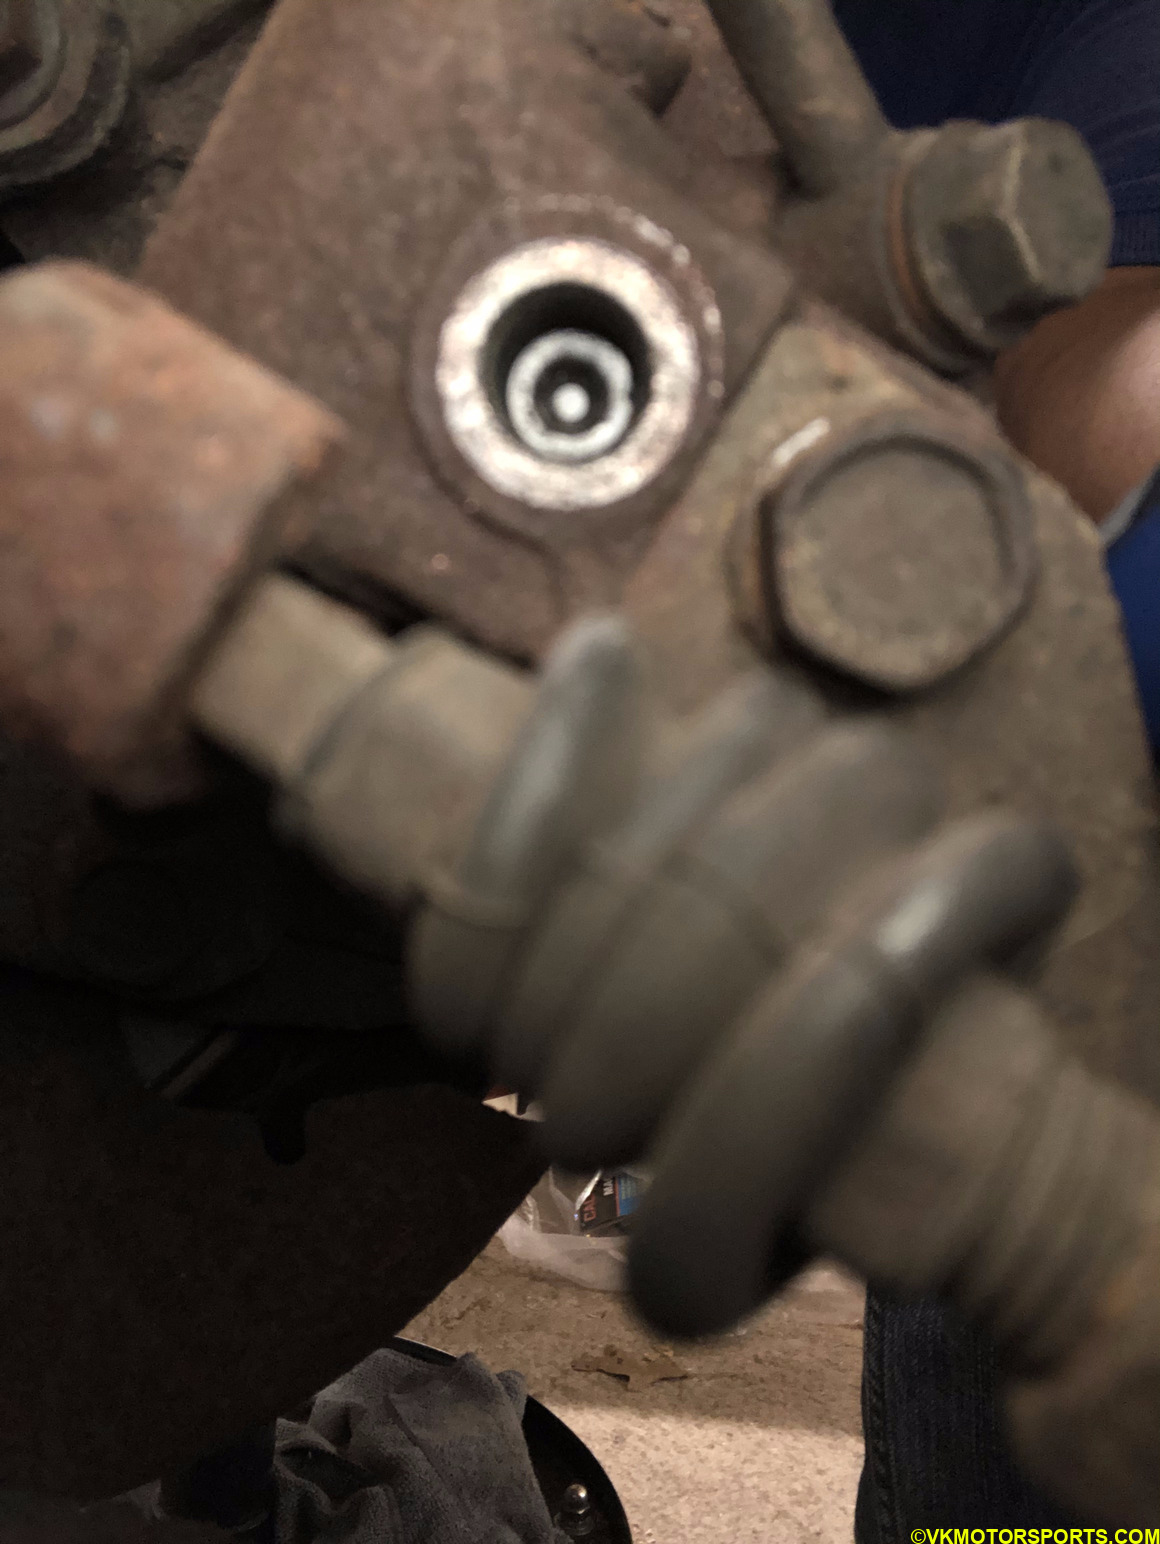 View of the e-brake nut removed